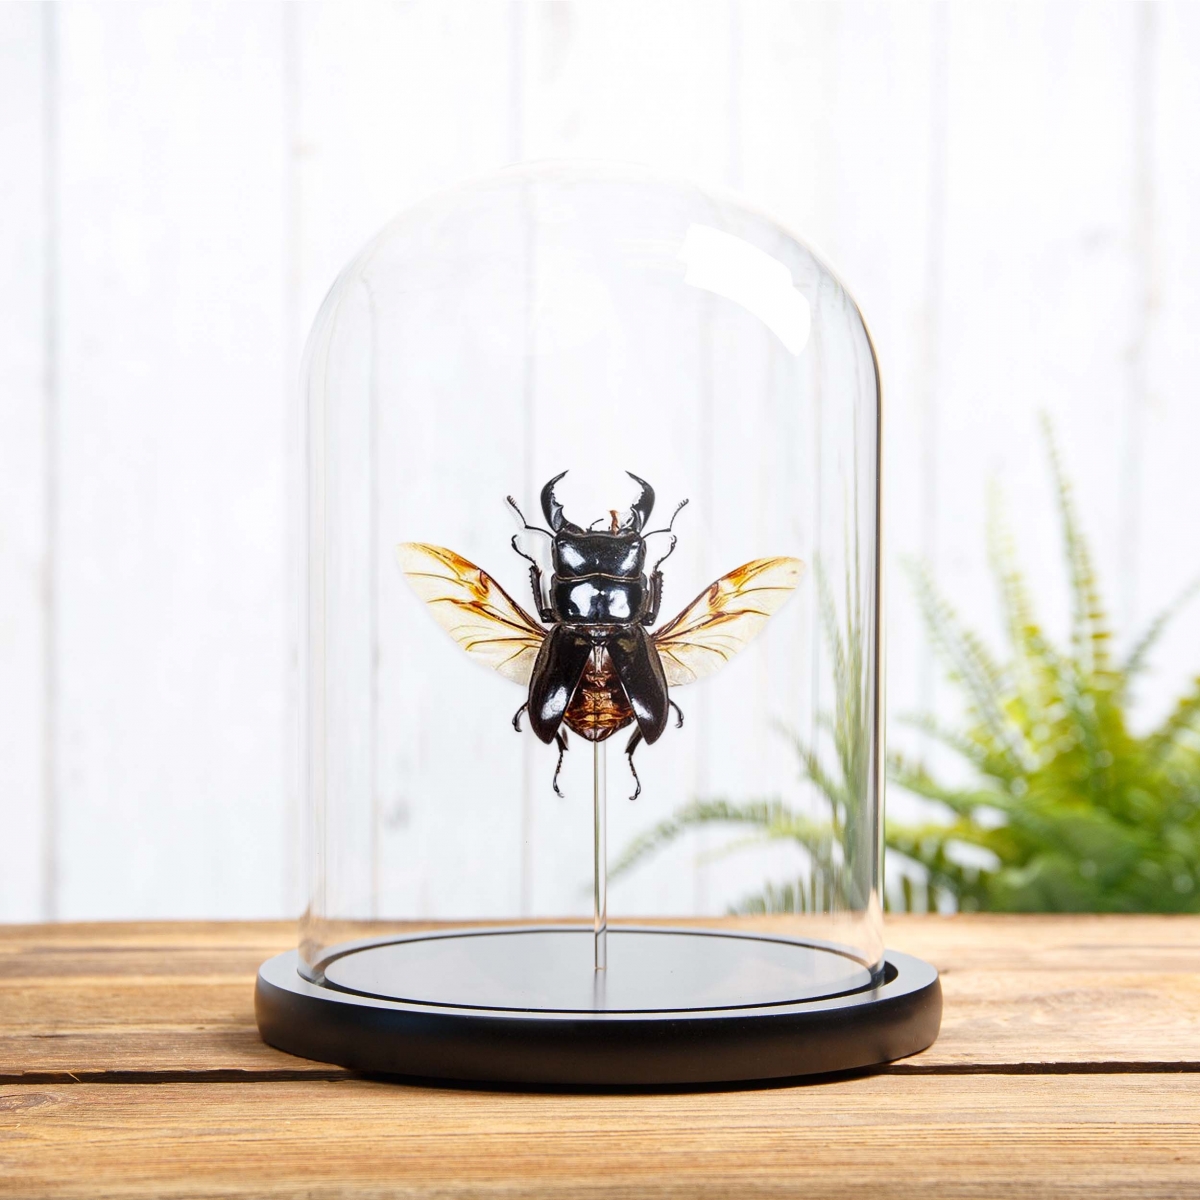 Minibeast Wing-spread Giant Stag Beetle in Glass Dome with Wooden Base (Dorcus titanus)